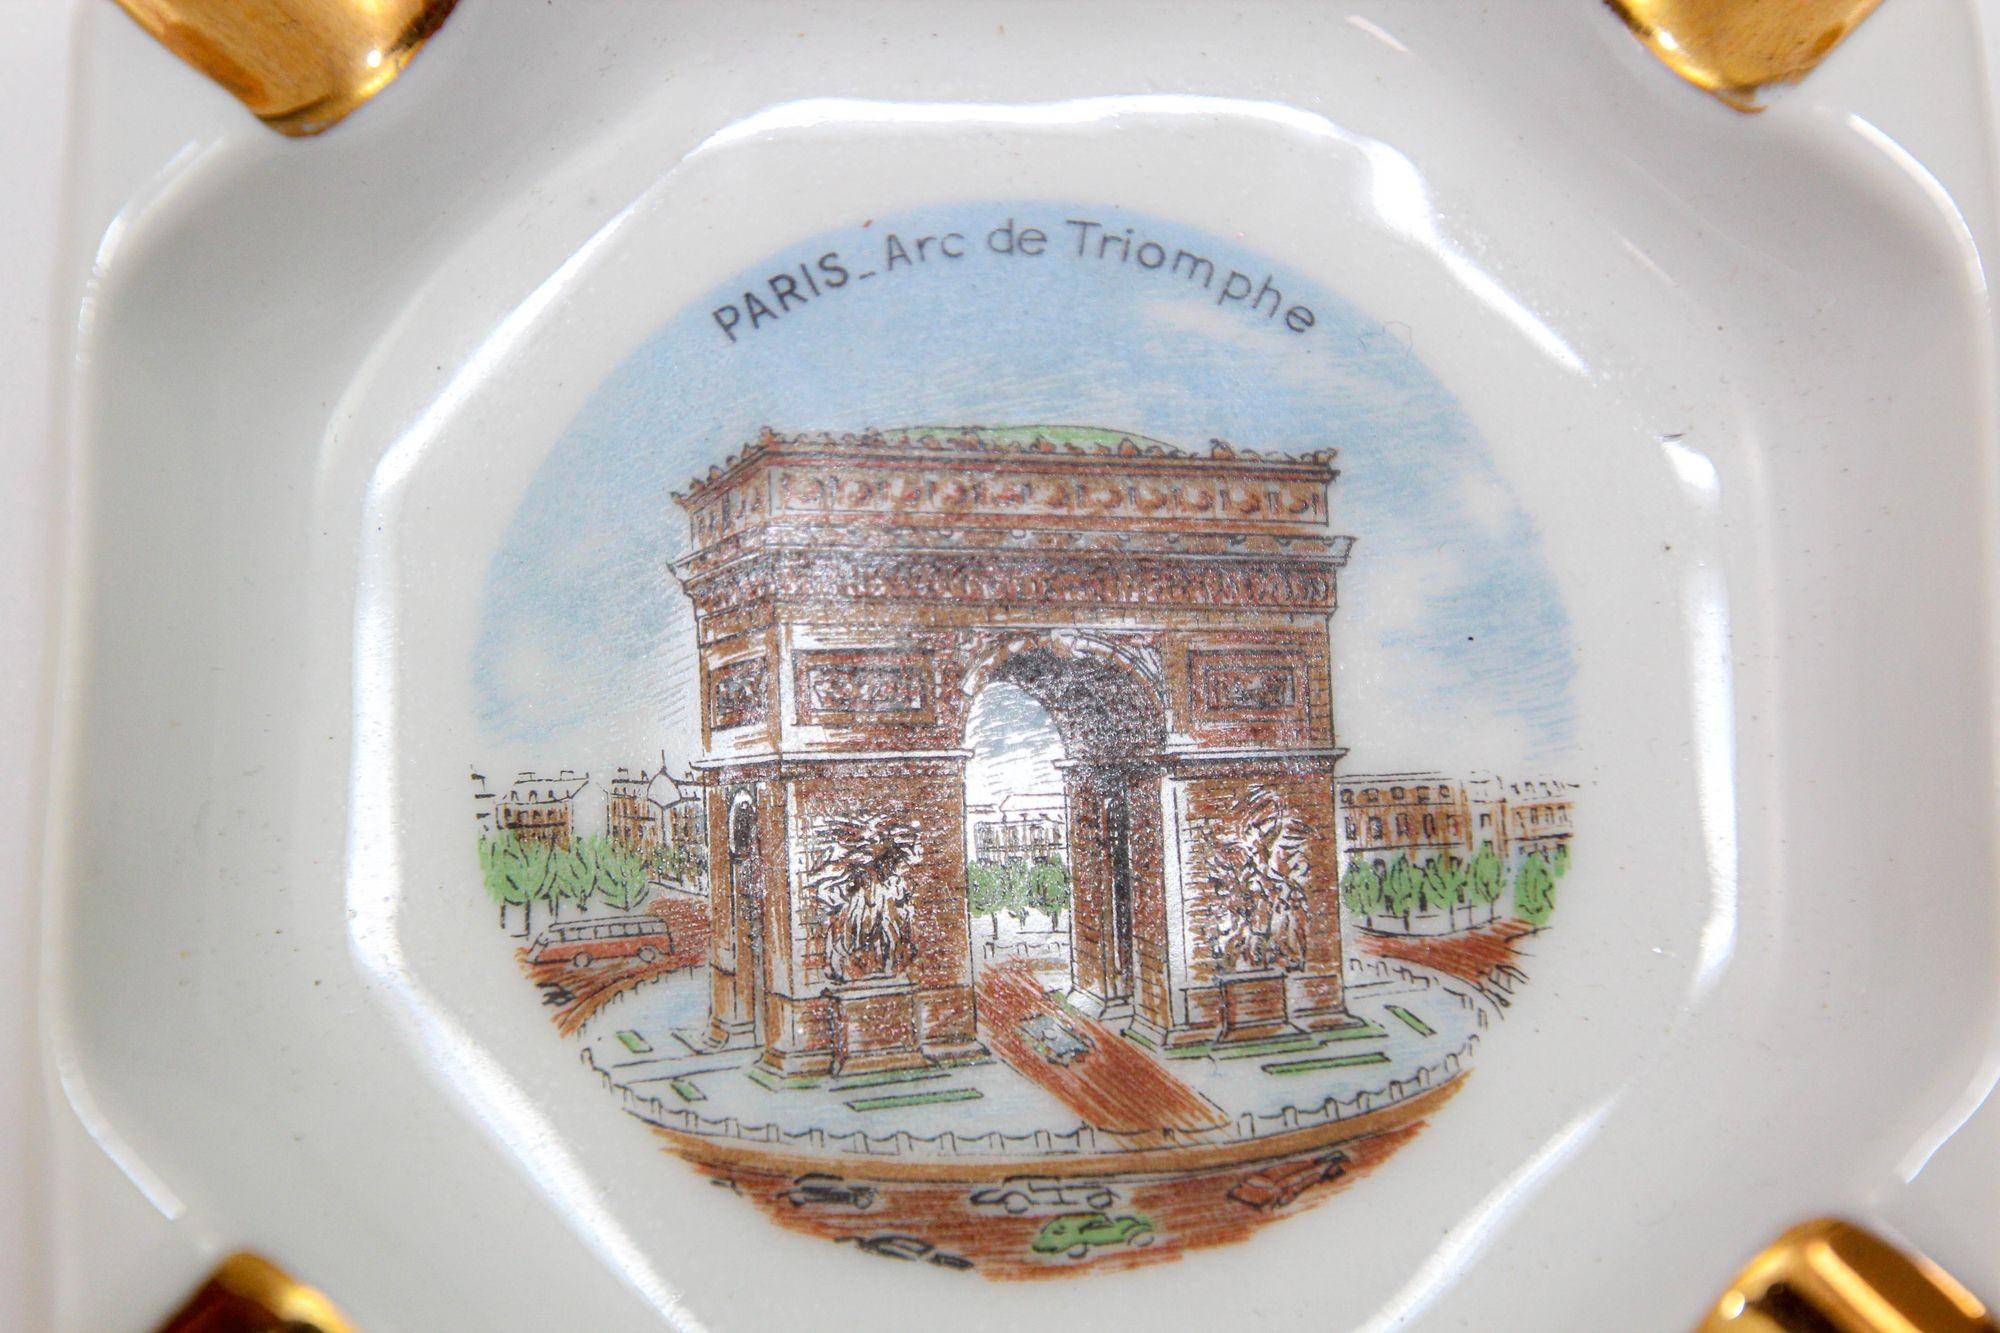 Porcelain Ashtray Limoges Paris Arc de Triomphe Hand-Painted Dish France 1960s In Good Condition For Sale In North Hollywood, CA